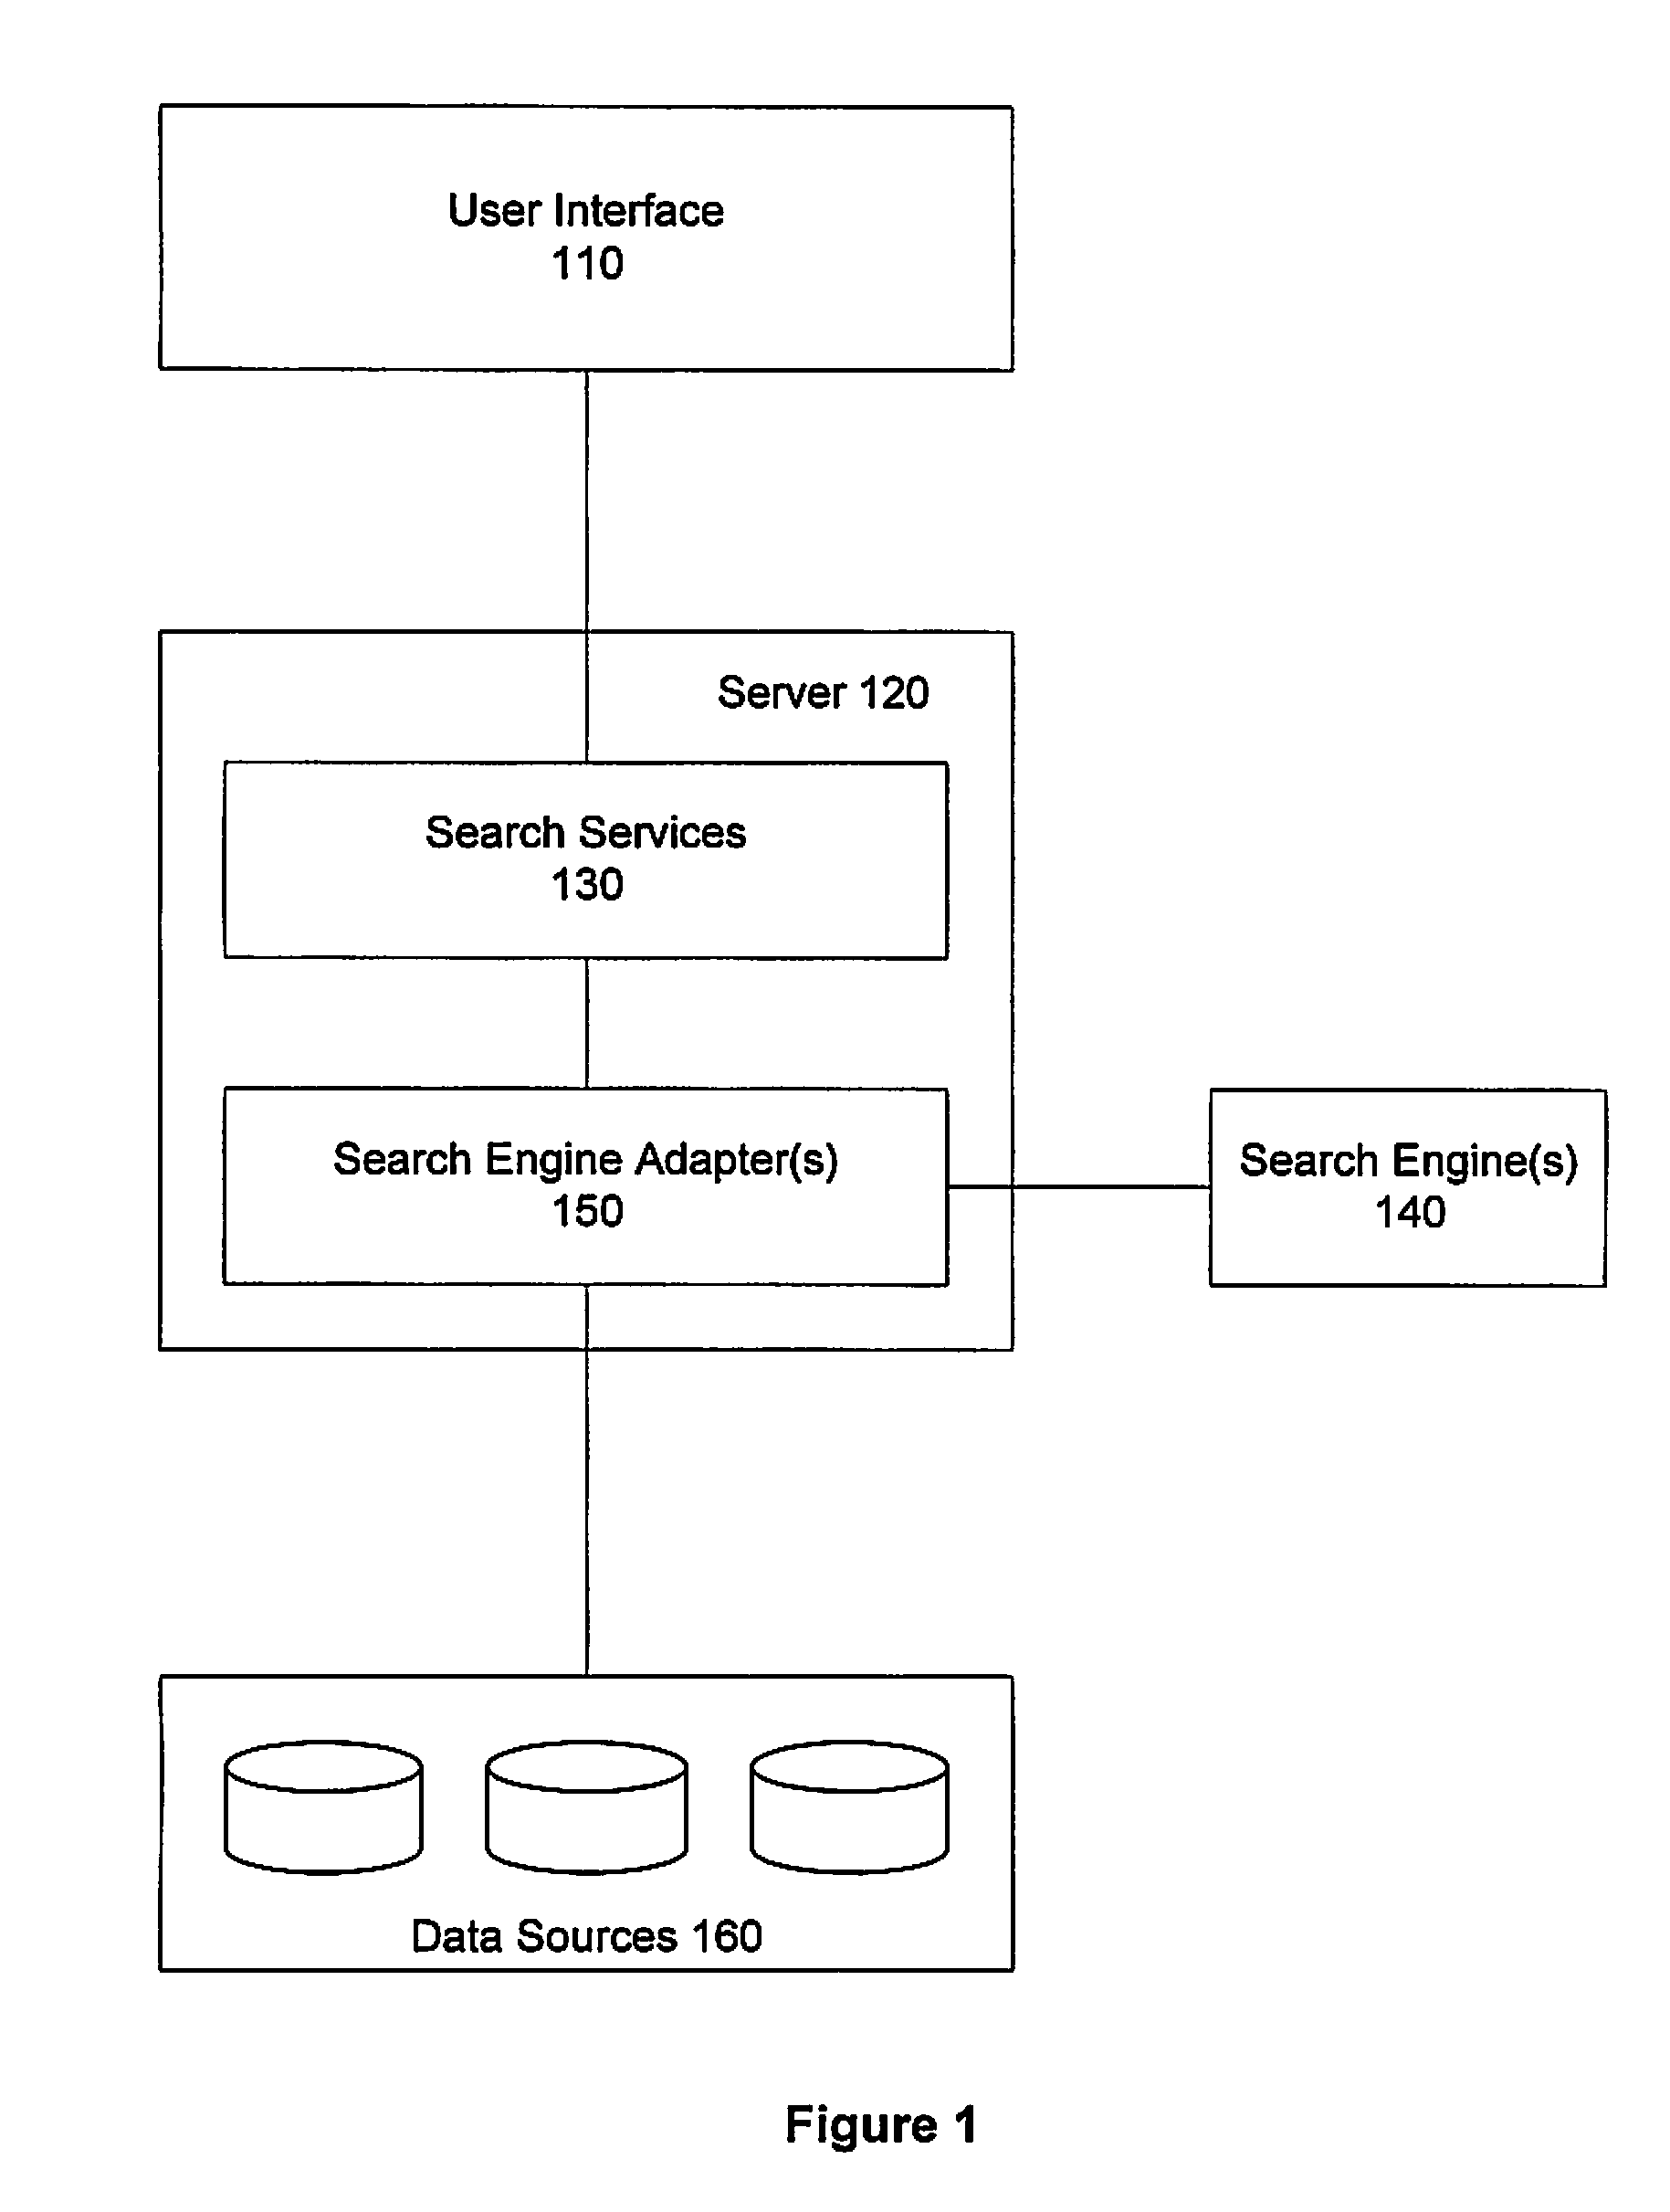 Method and apparatus for employing a searchable abstraction layer over enterprise-wide searchable objects